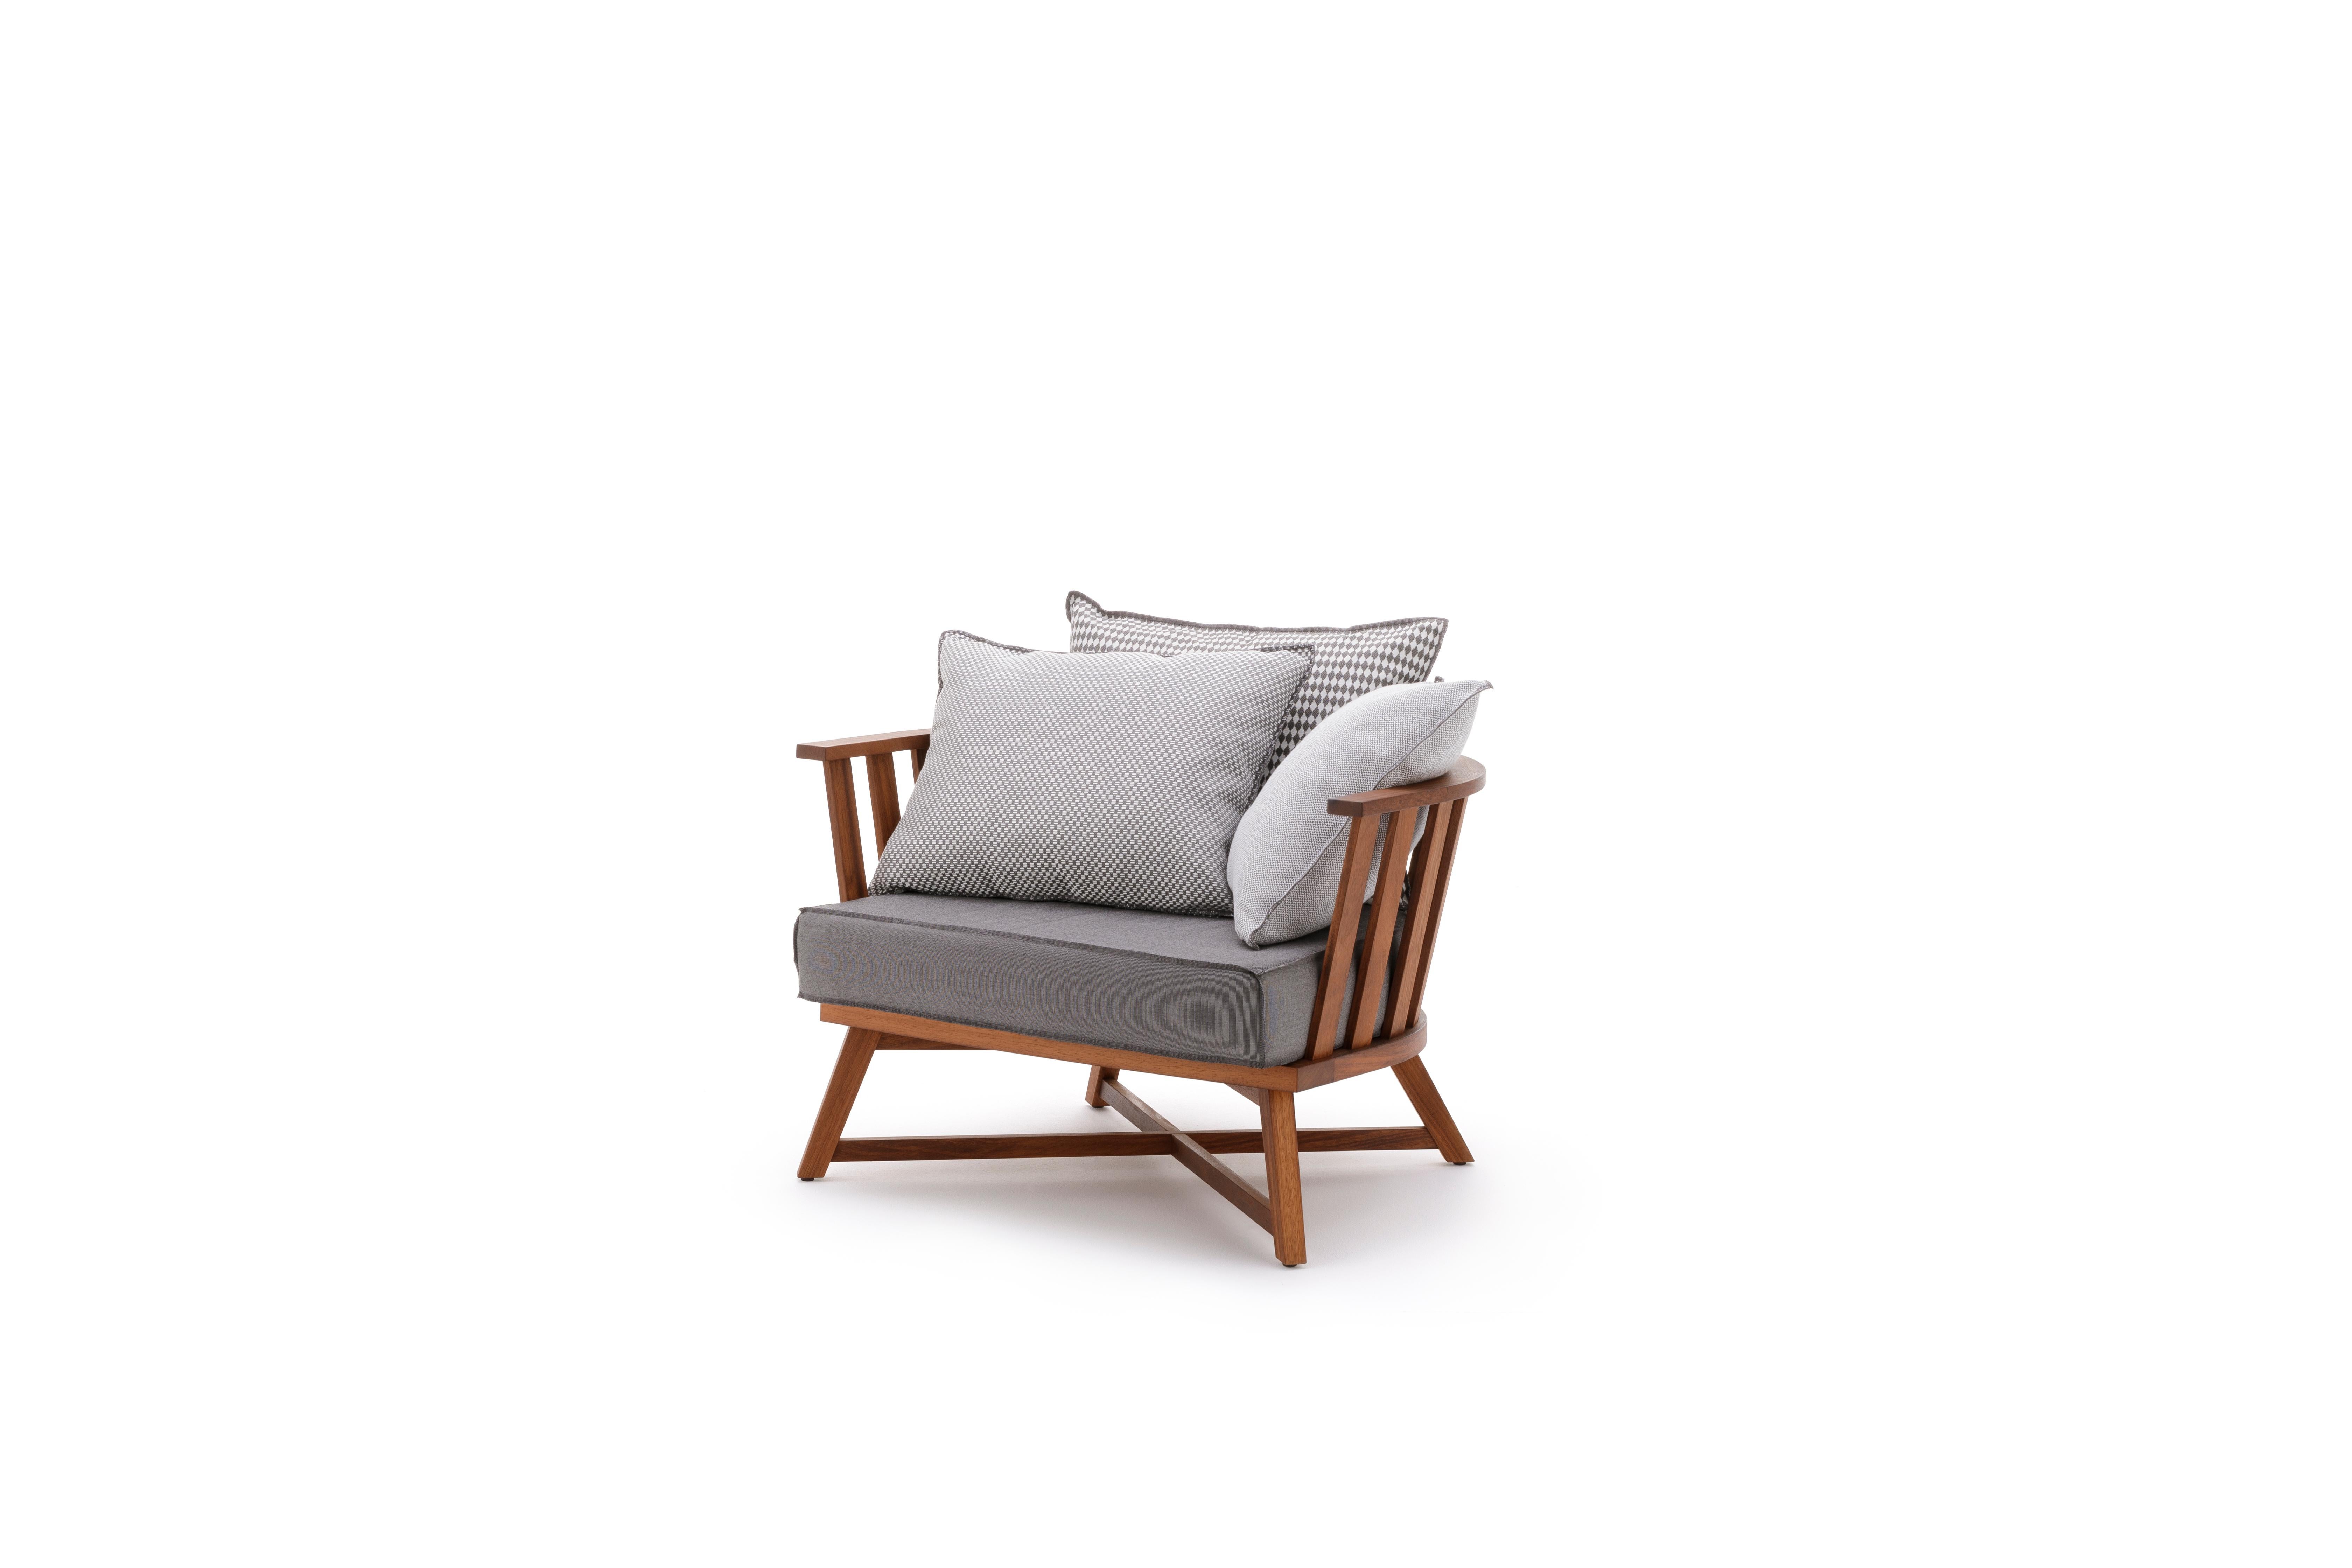 Enveloping and comfortable armchair, Inout 707 has a semi-circular slatted structure, with legs that intersect to form a cross: it is made of oiled Iroko, particularly durable wood because it is naturally resistant to water and moisture. The